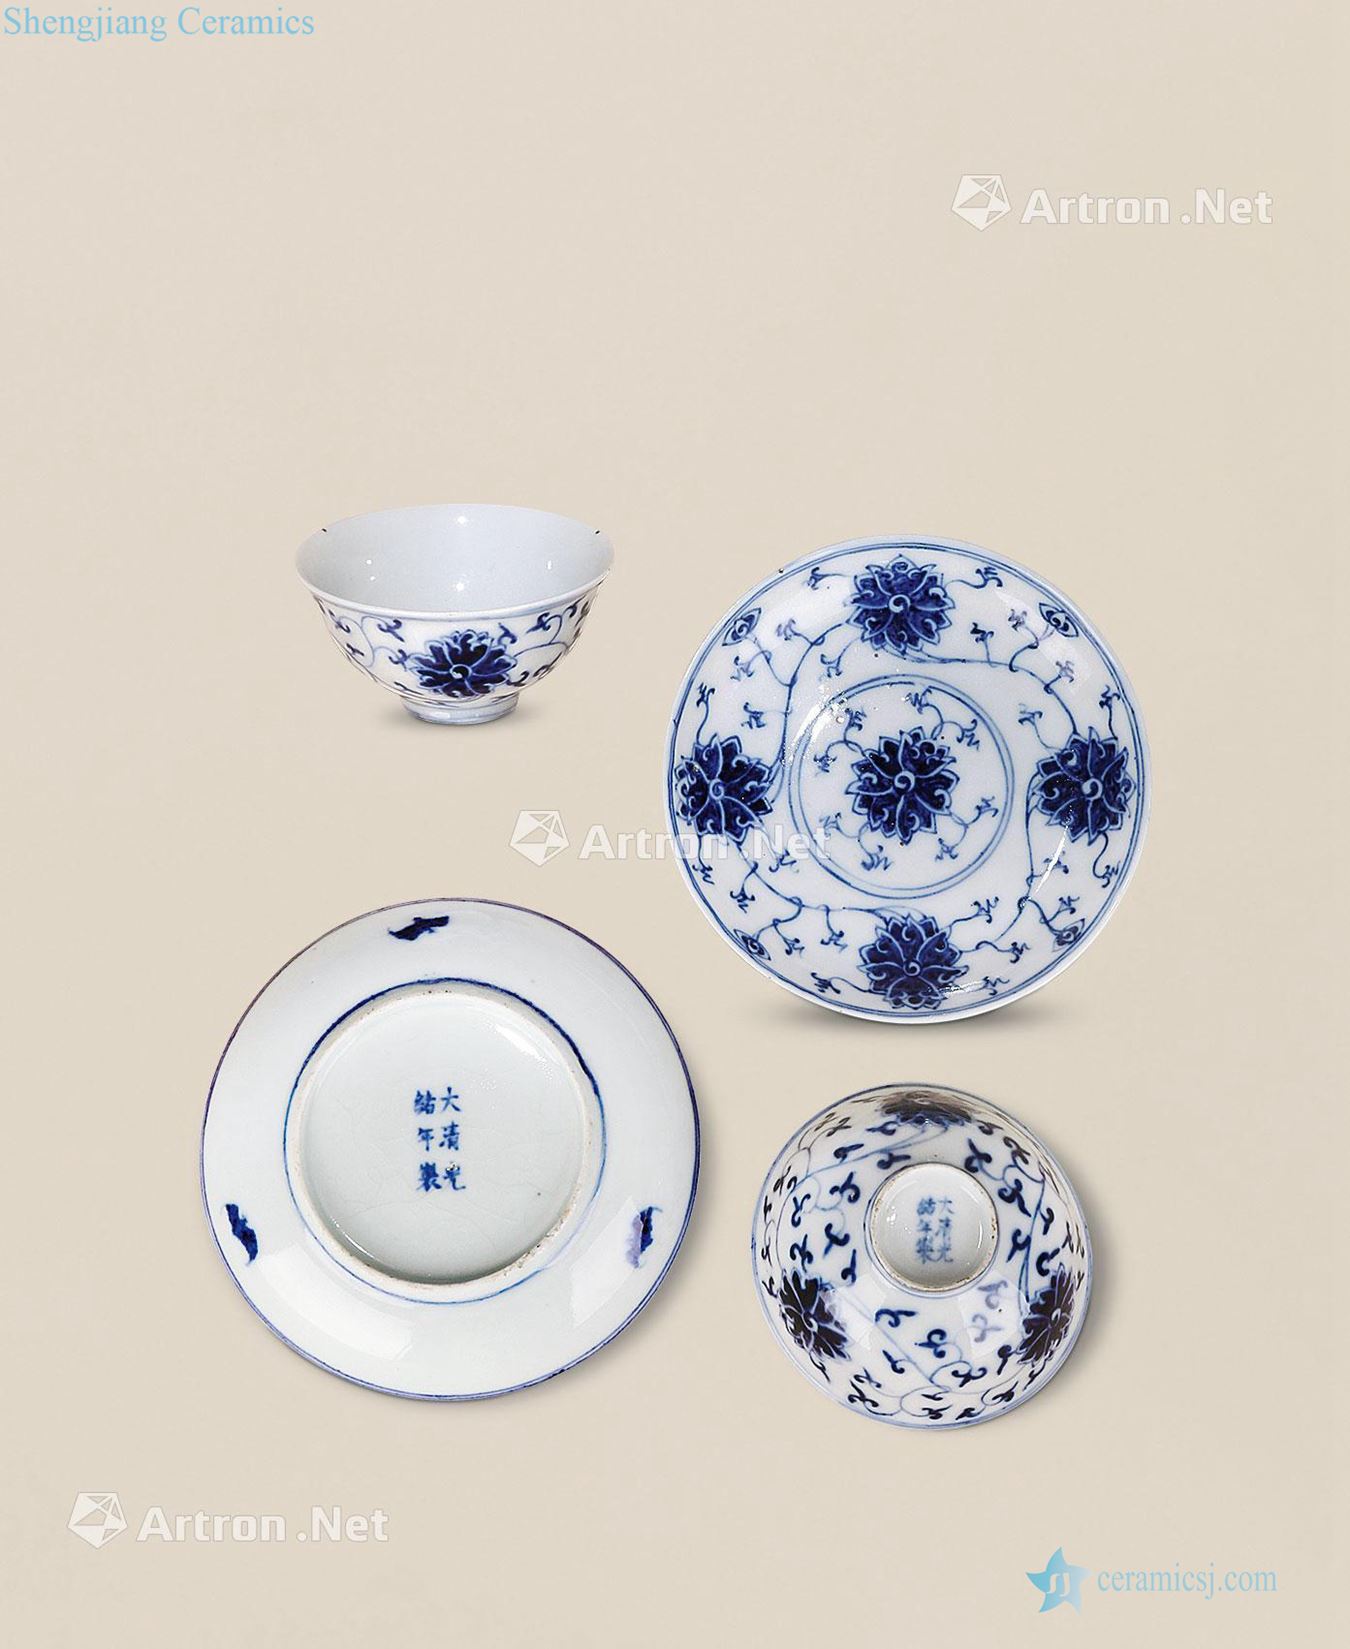 Qing guangxu Blue and white tie up lotus flower dish (four pieces)